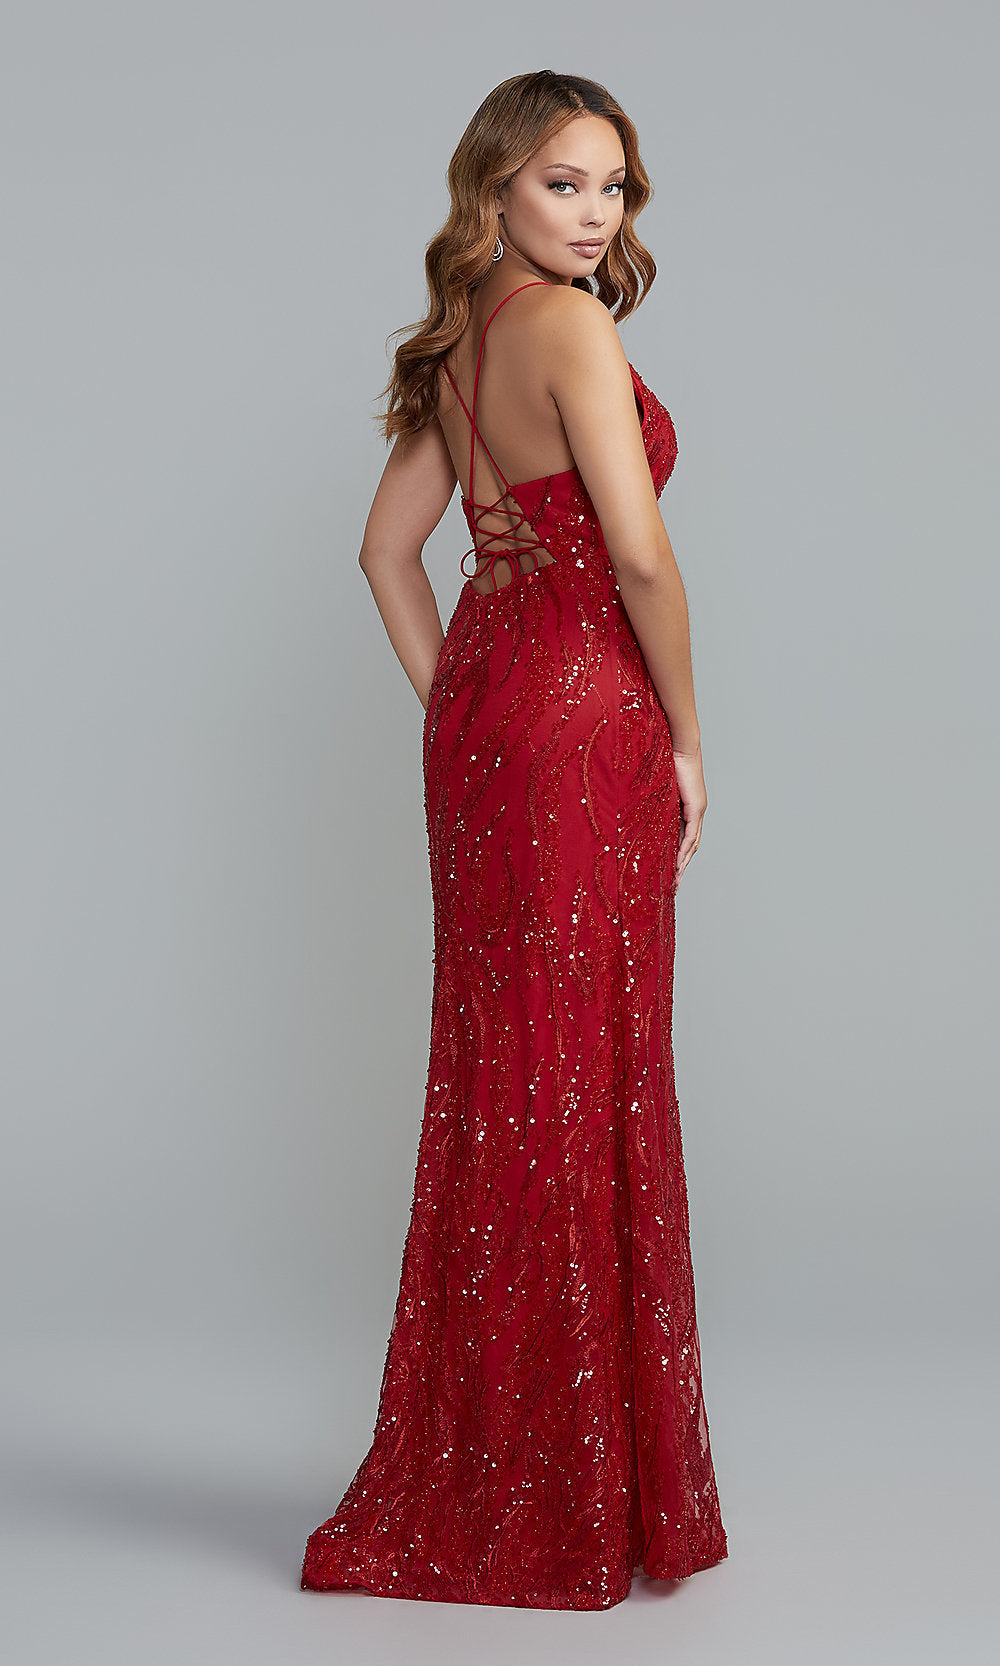  Corset-Back Long Formal Dress with Sparkly Overlay